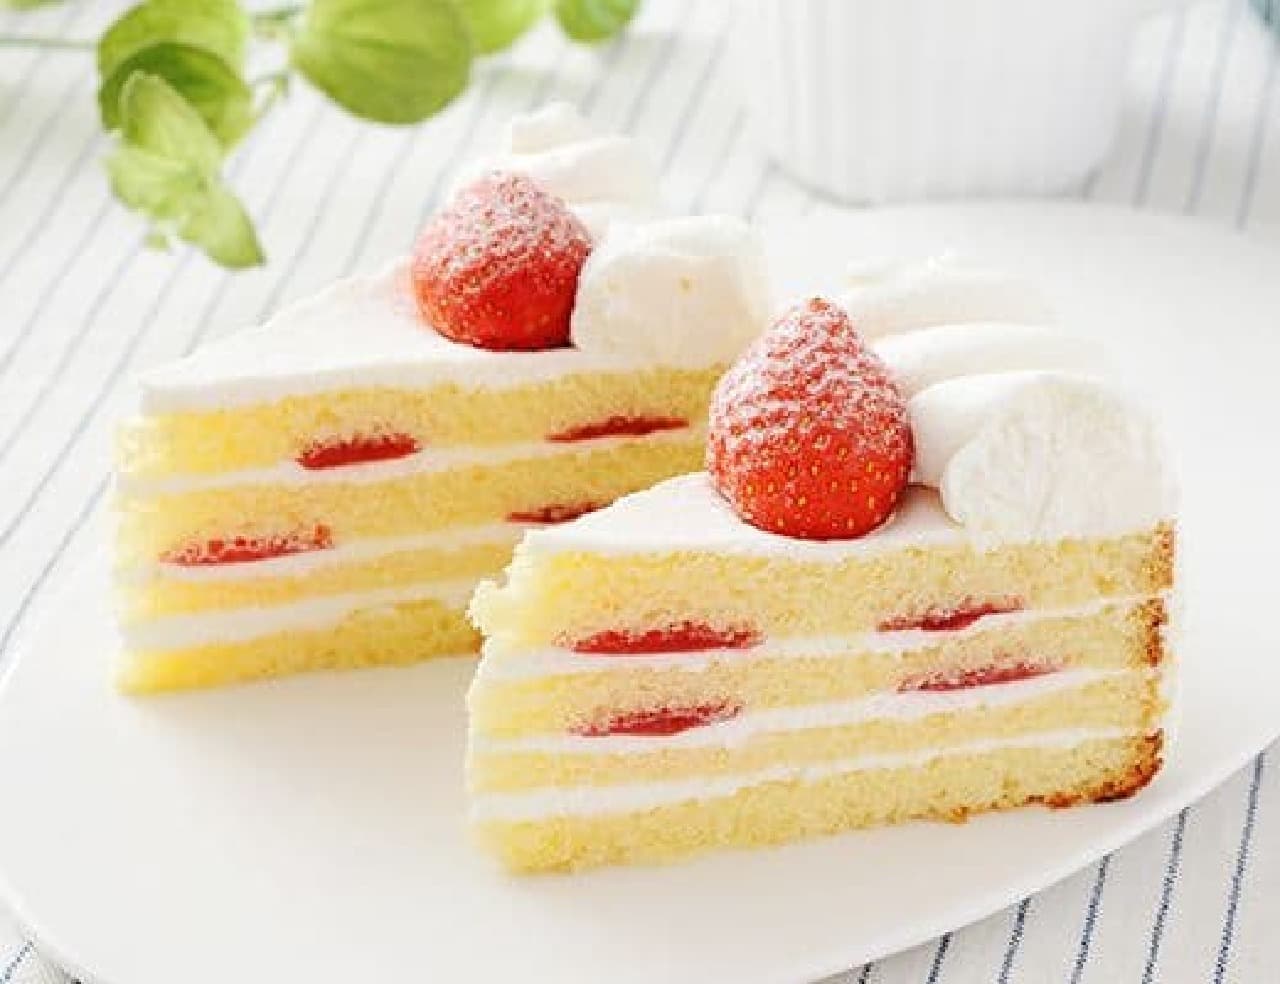 Lawson "Party Cake Strawberry Short 2 Pieces"